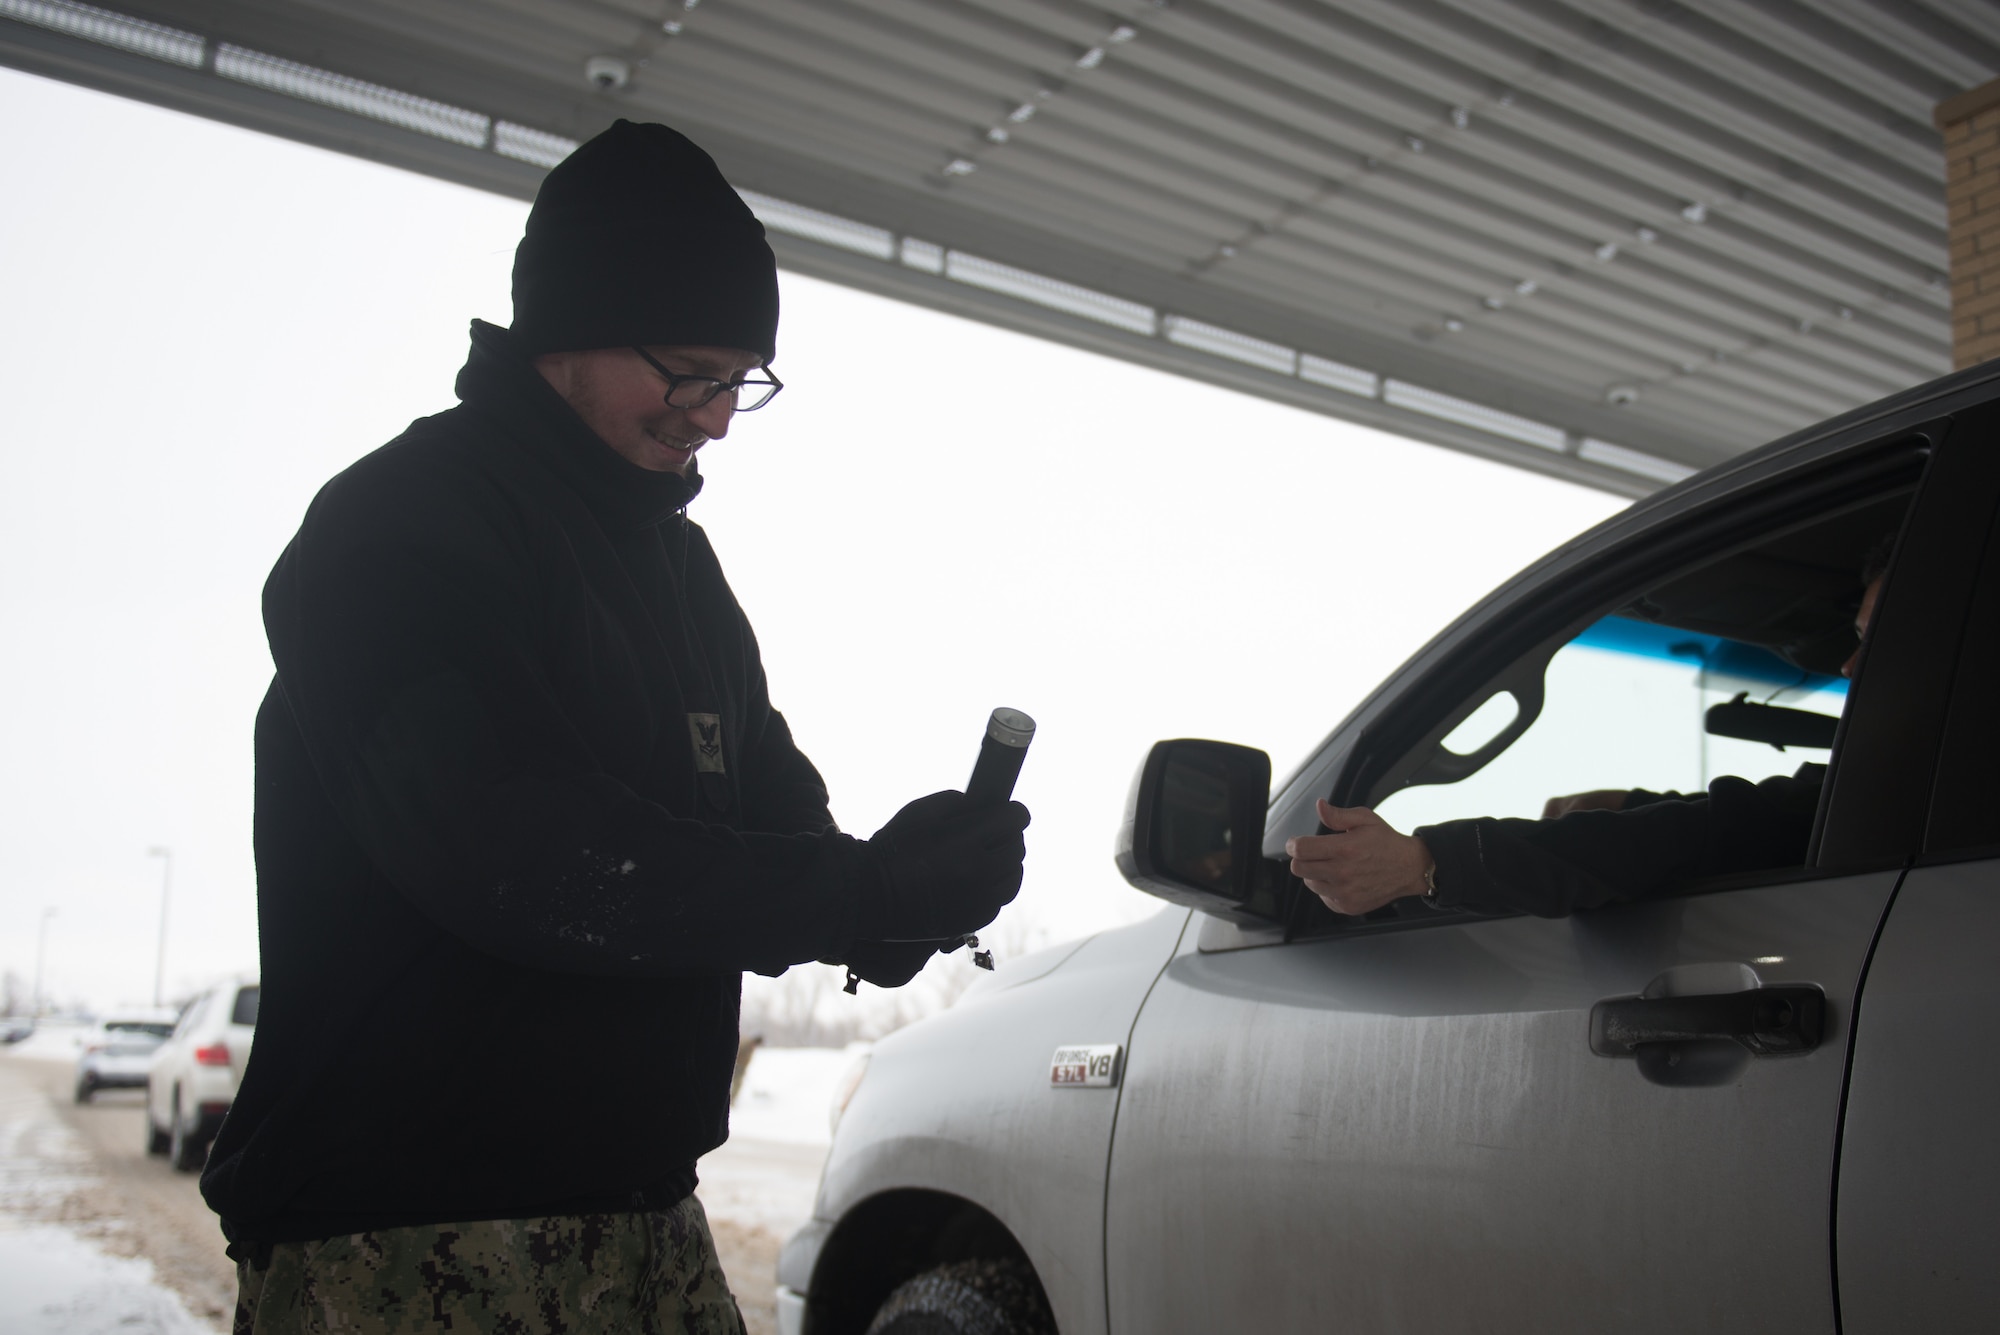 Master of Arms 2nd Class Christopher Henzerling, 55th Security Force Squadron, checks an I.D. at the U.S. Strategic Command gate March 7, 2019, on Offutt Air Force Base. As a gate guard, he is required to perform his duties in austere environments. (U.S. Air Force photo by Tech. Sgt. Rachelle Blake)